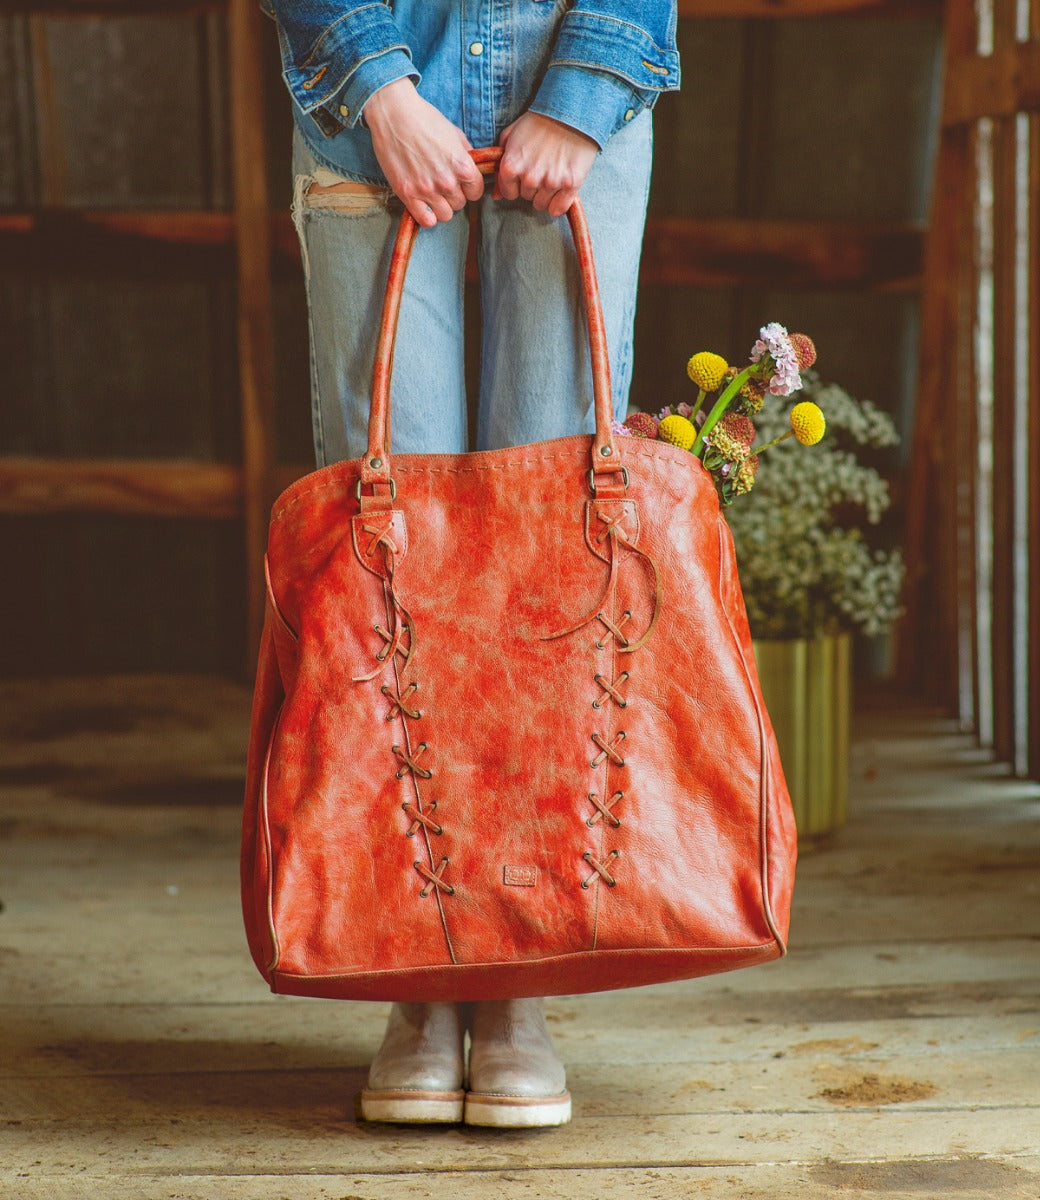 A woman carrying a Rebekah tote bag made by Bed Stu.